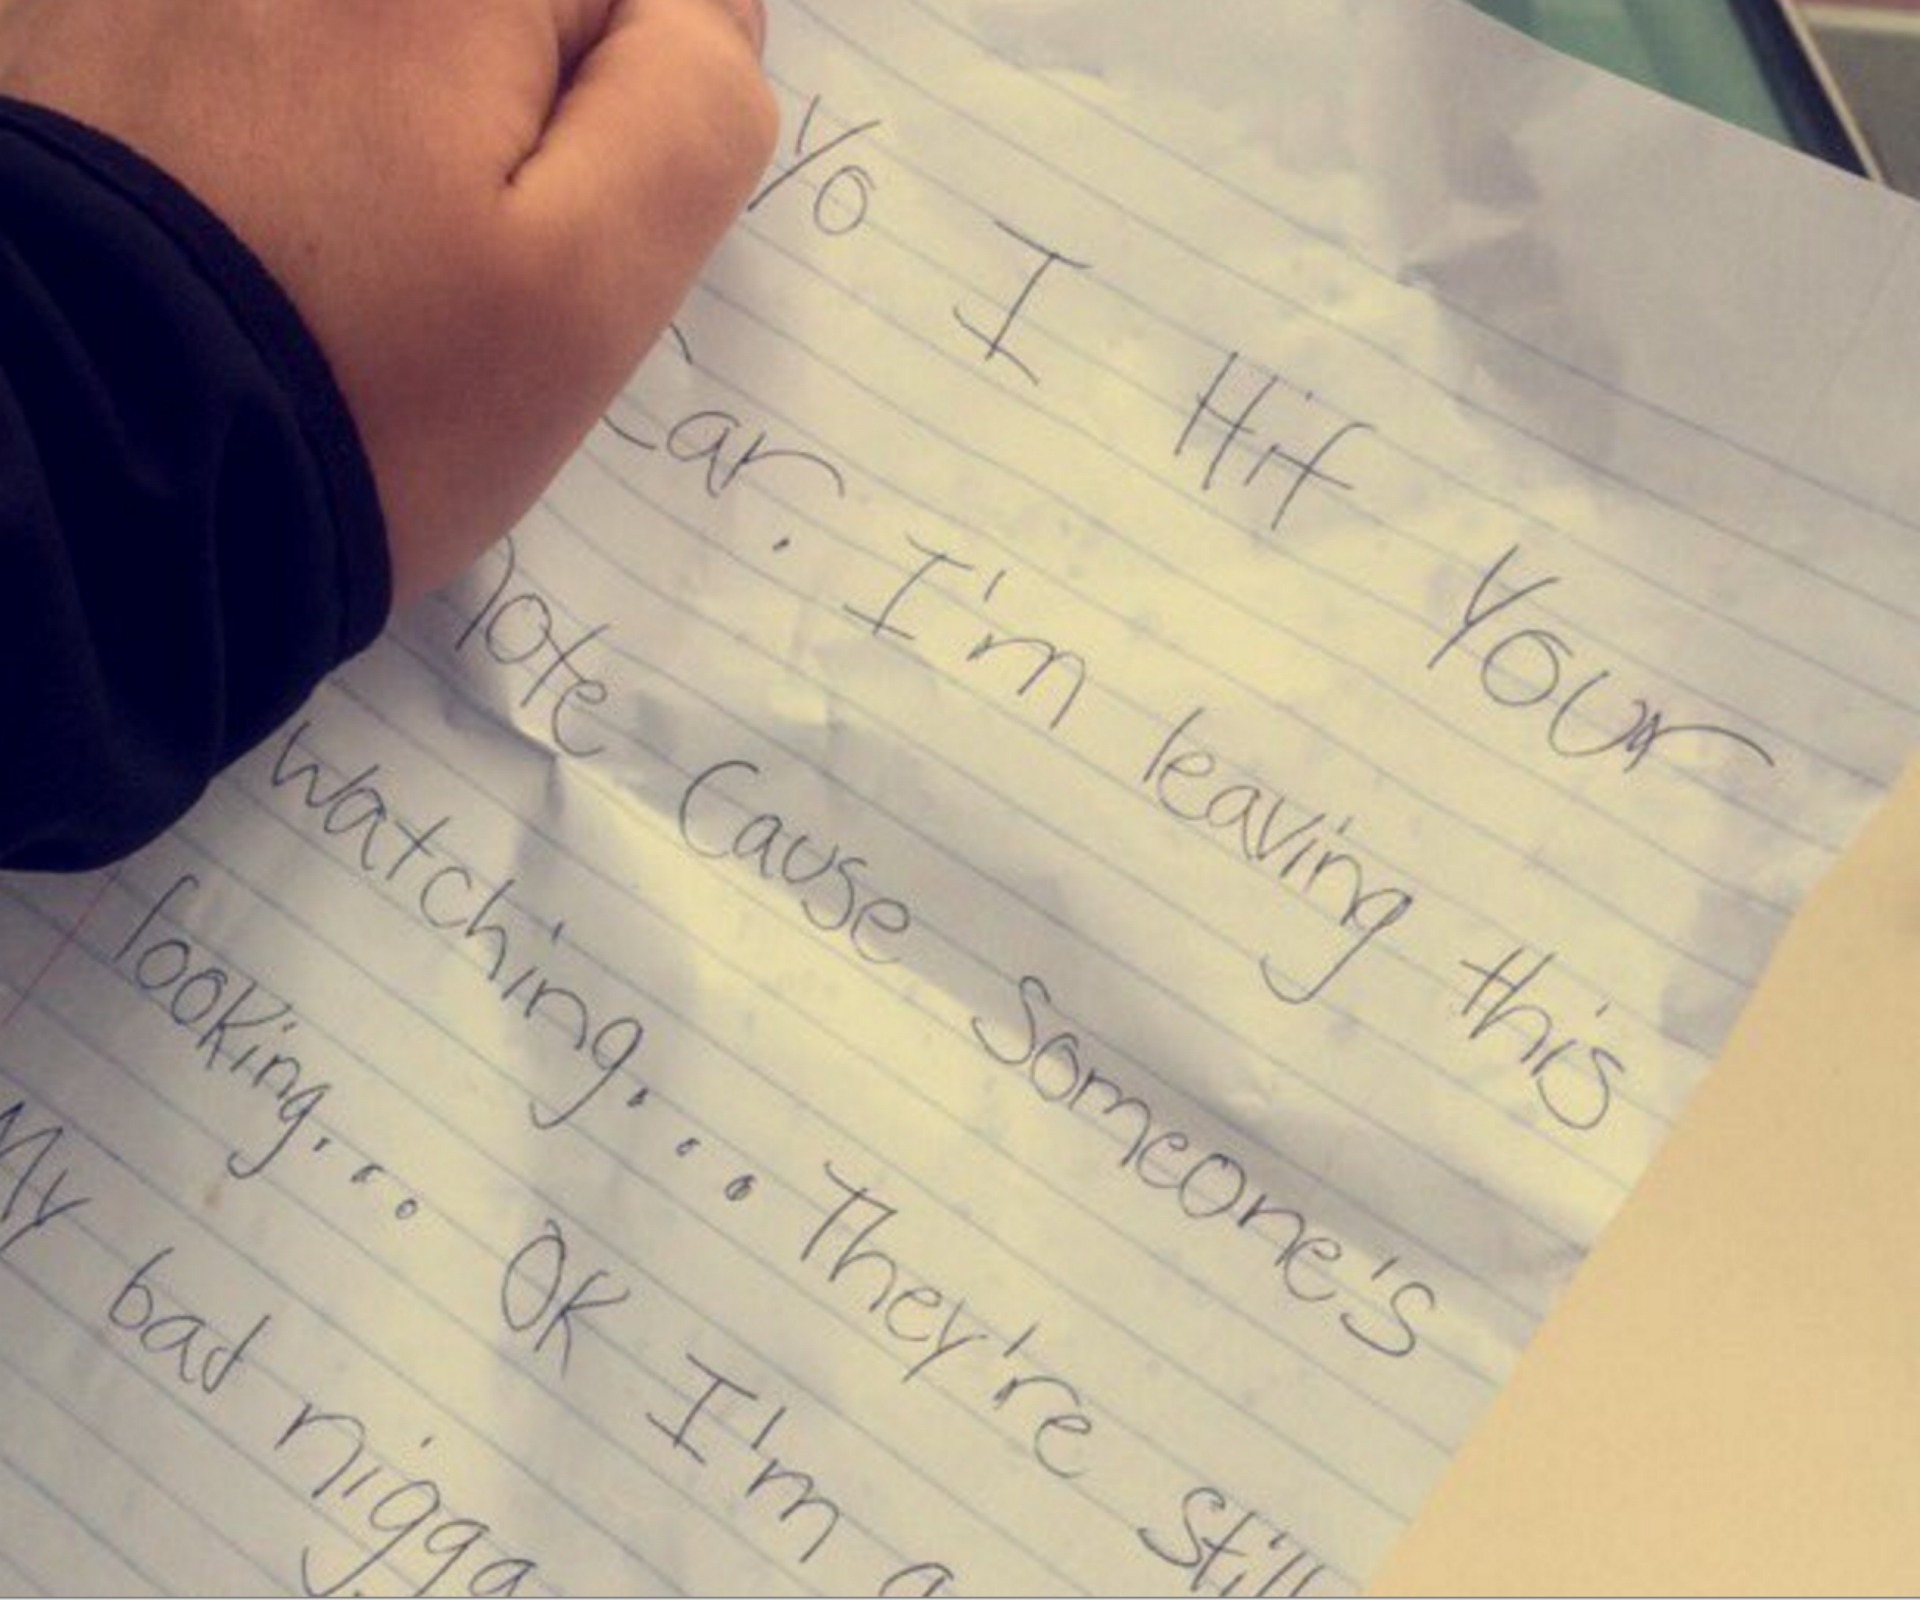 Man finds hilarious note from stranger who hit his car